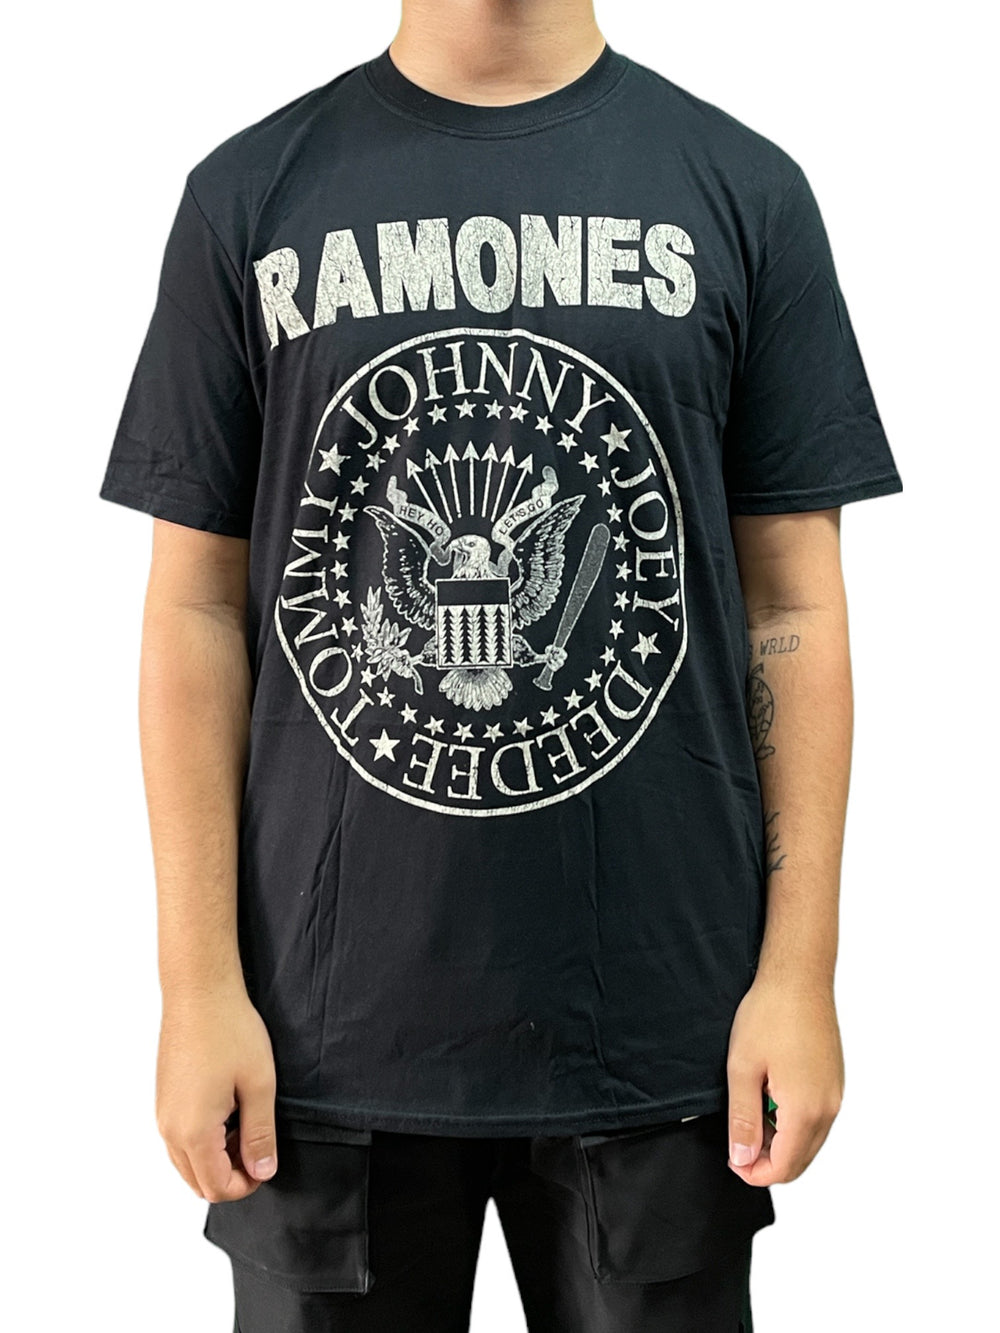 Ramones The Seal Hey Ho Back Printed Unisex Official T Shirt Brand New Various Sizes